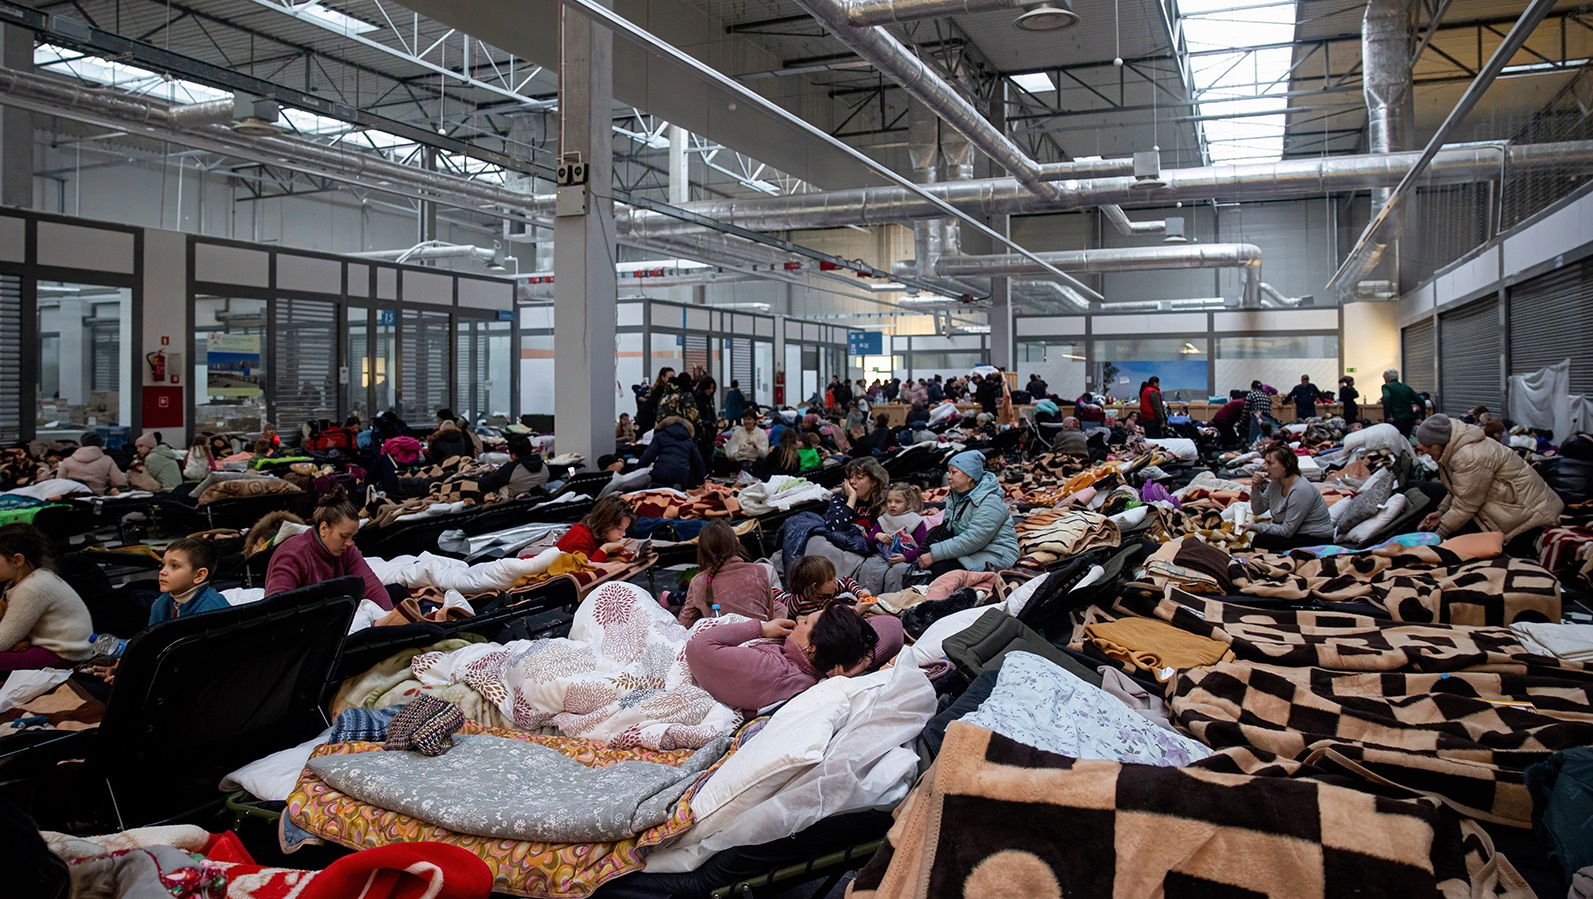 KORCZOWA, POLAND - 2022/03/07: Refugees are resting inside the reception area.
A temporary reception area has been set up at a warehouse at Korczowa to cope with hundreds of thousands of Ukrainian refugees fleeing through the Korczowa-Krakowiec border. (Photo by Hesther Ng/SOPA Images/LightRocket via Getty Images)